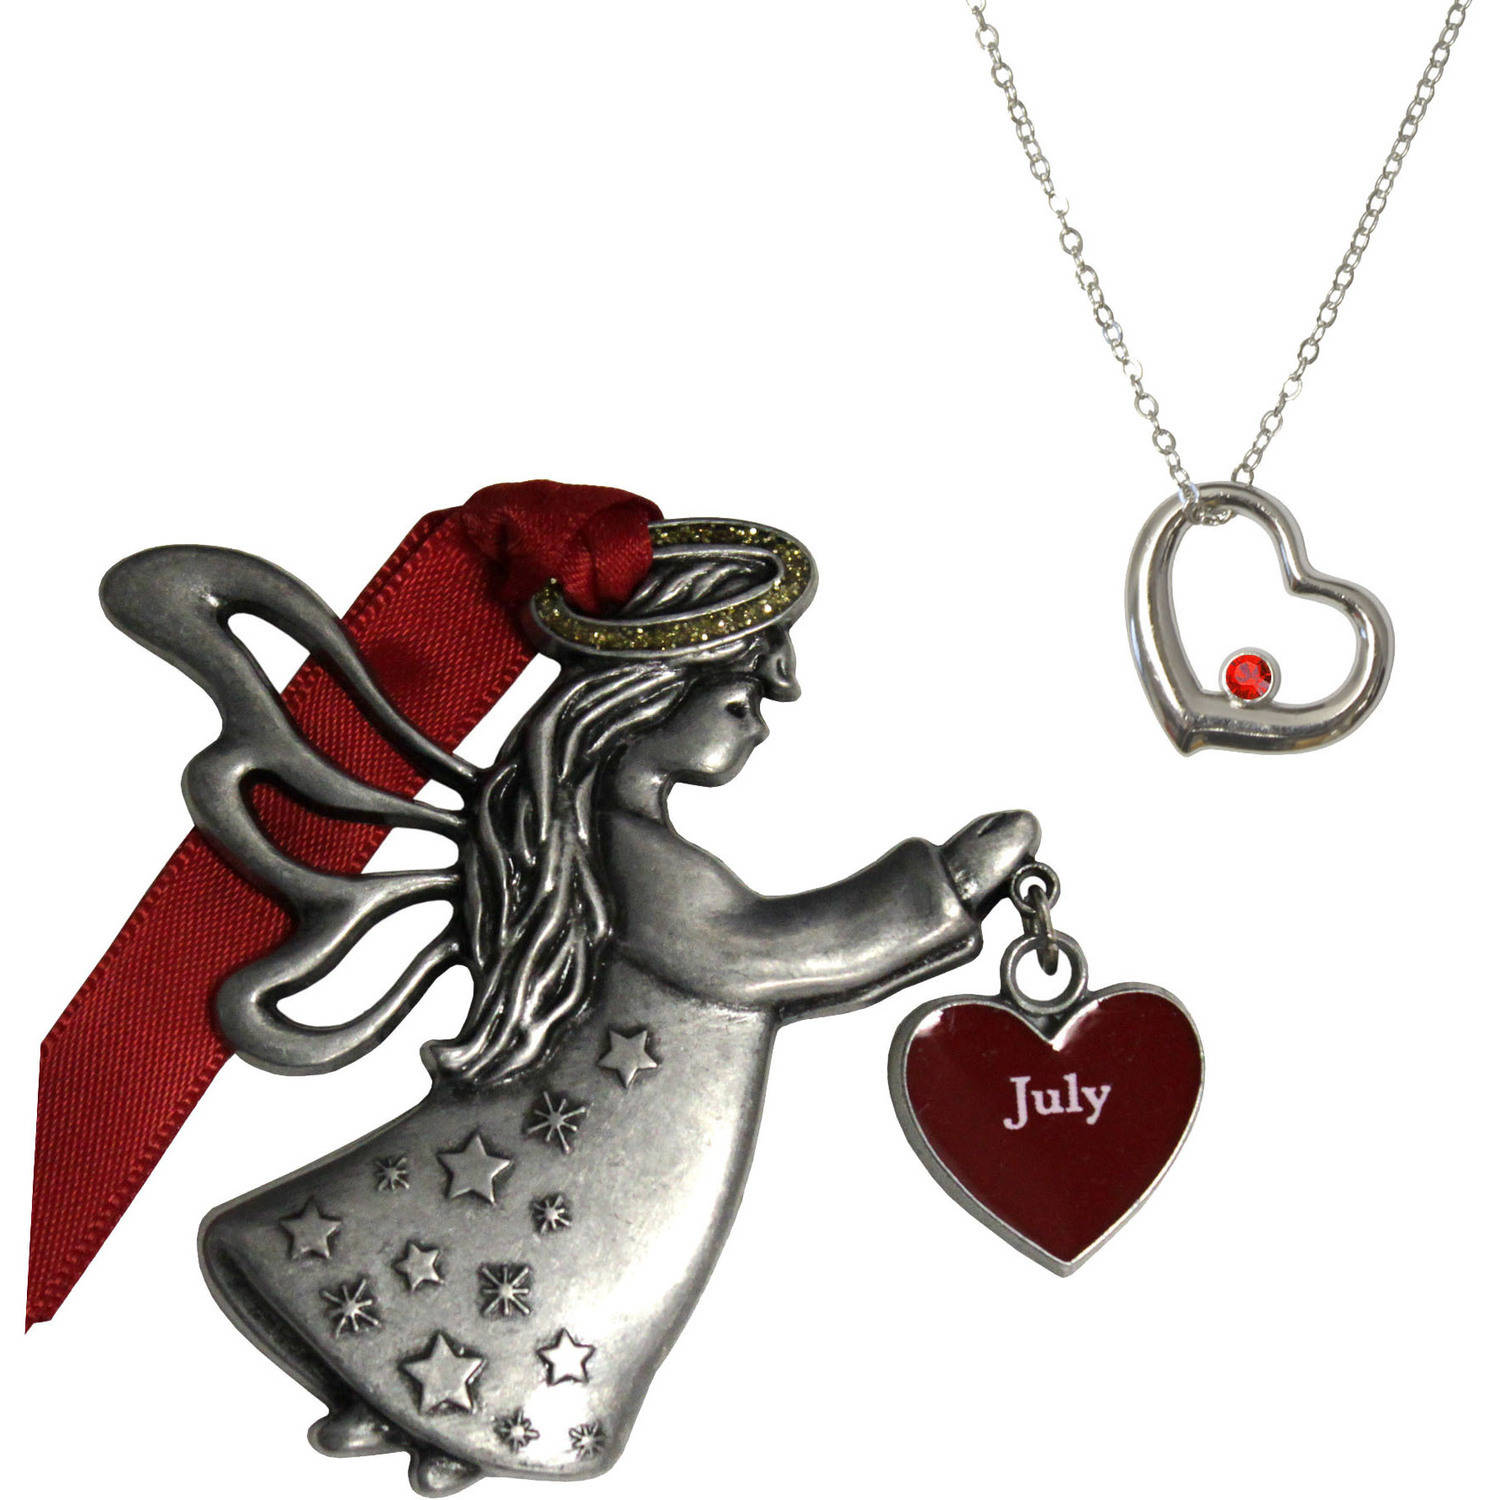 July Birthstone Angel Ornament and Necklace Set - image 1 of 1